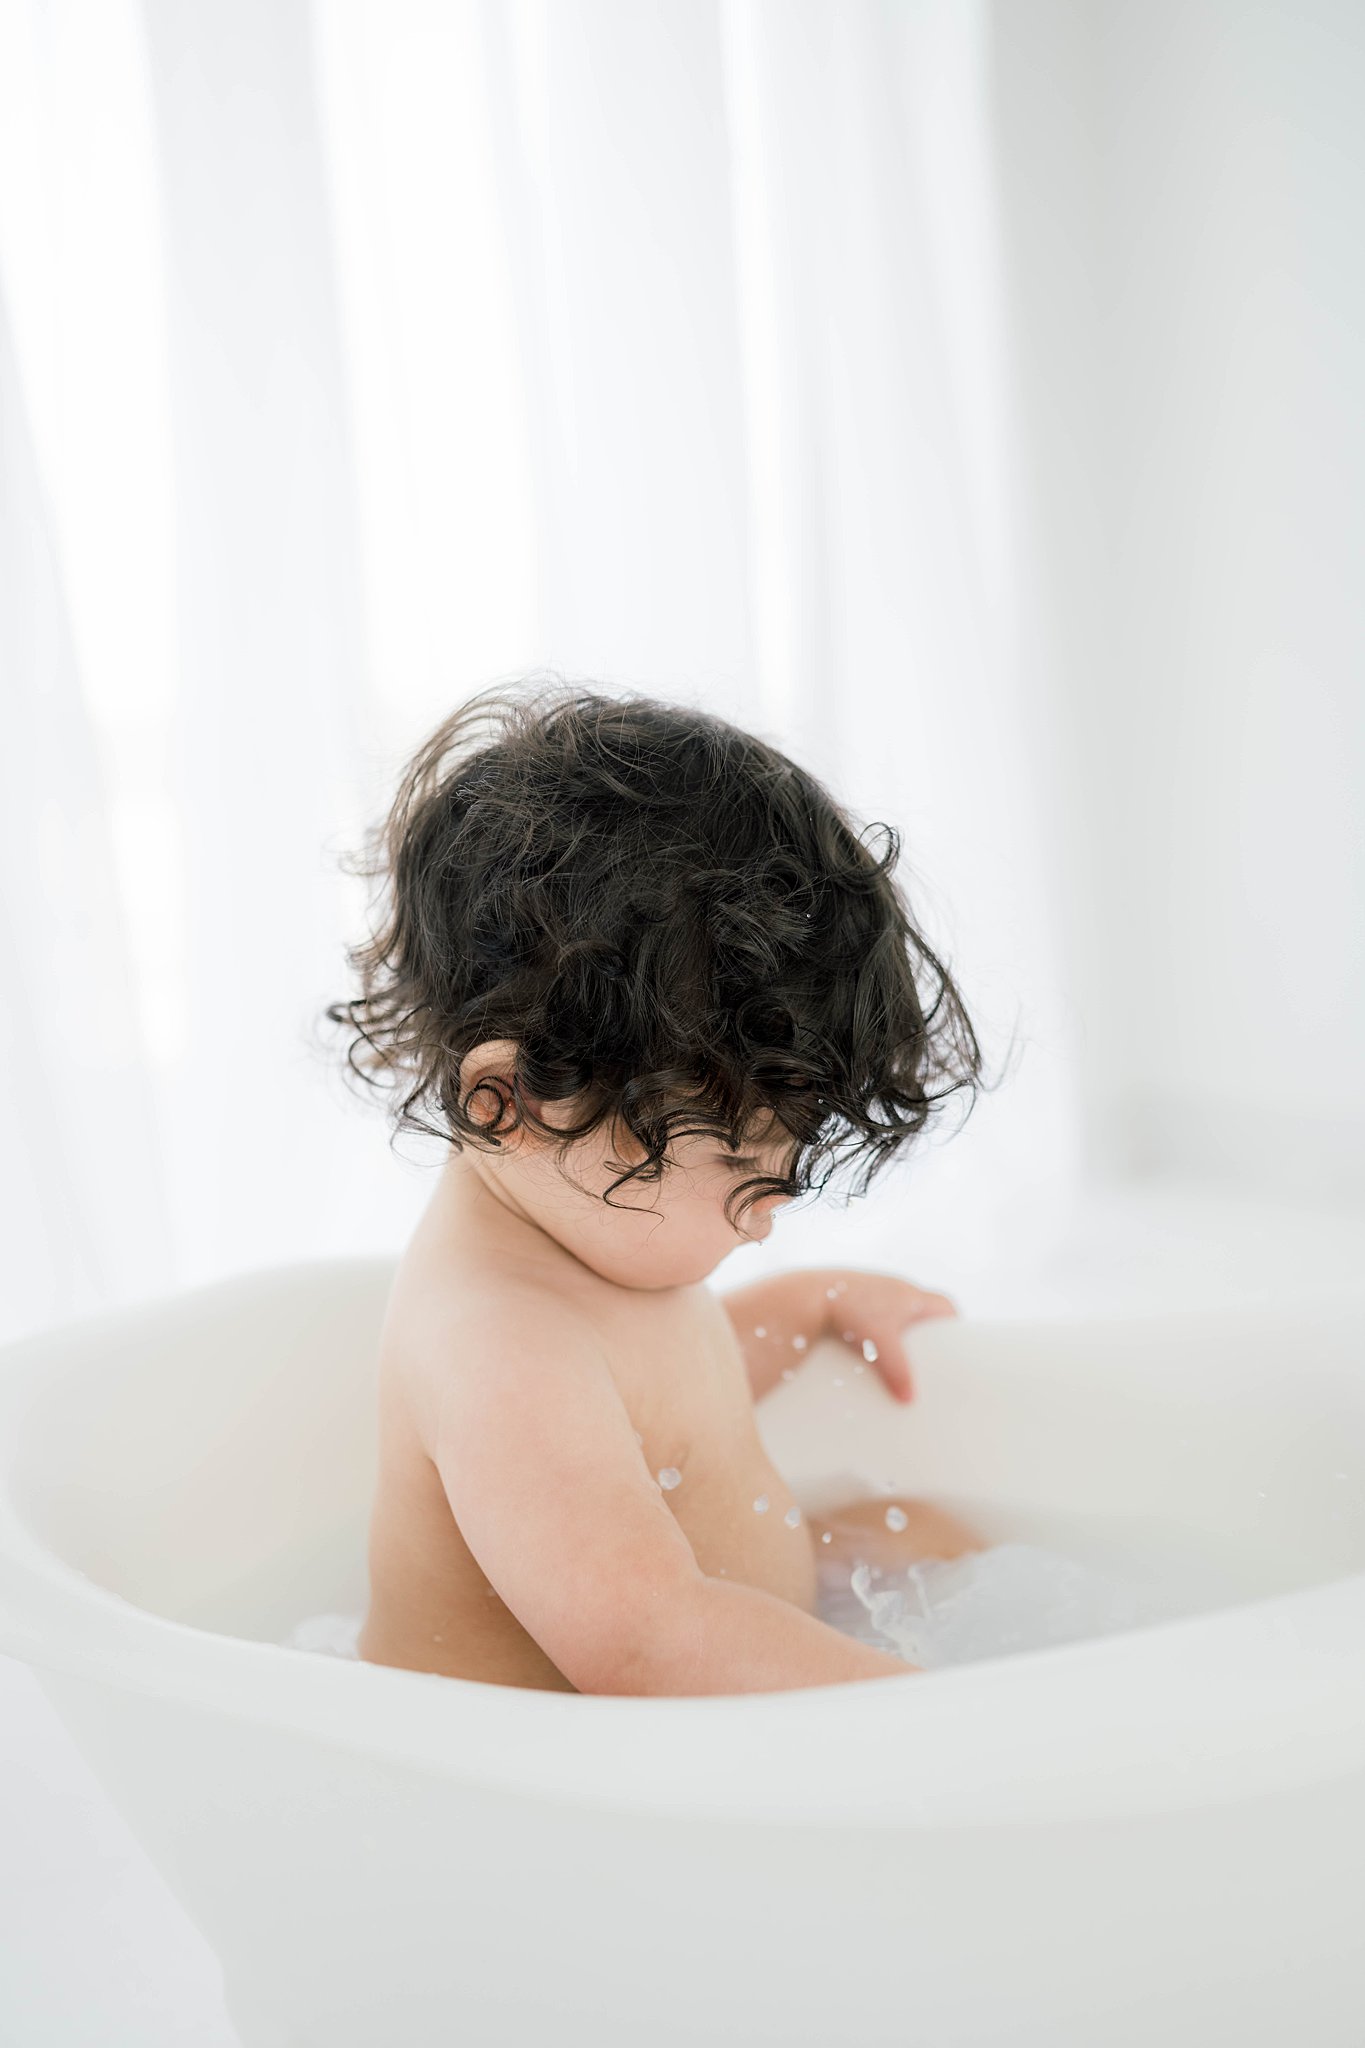 A toddler plays in the water of a small white bathtub in front of a window with white curtains baby furniture Oklahoma